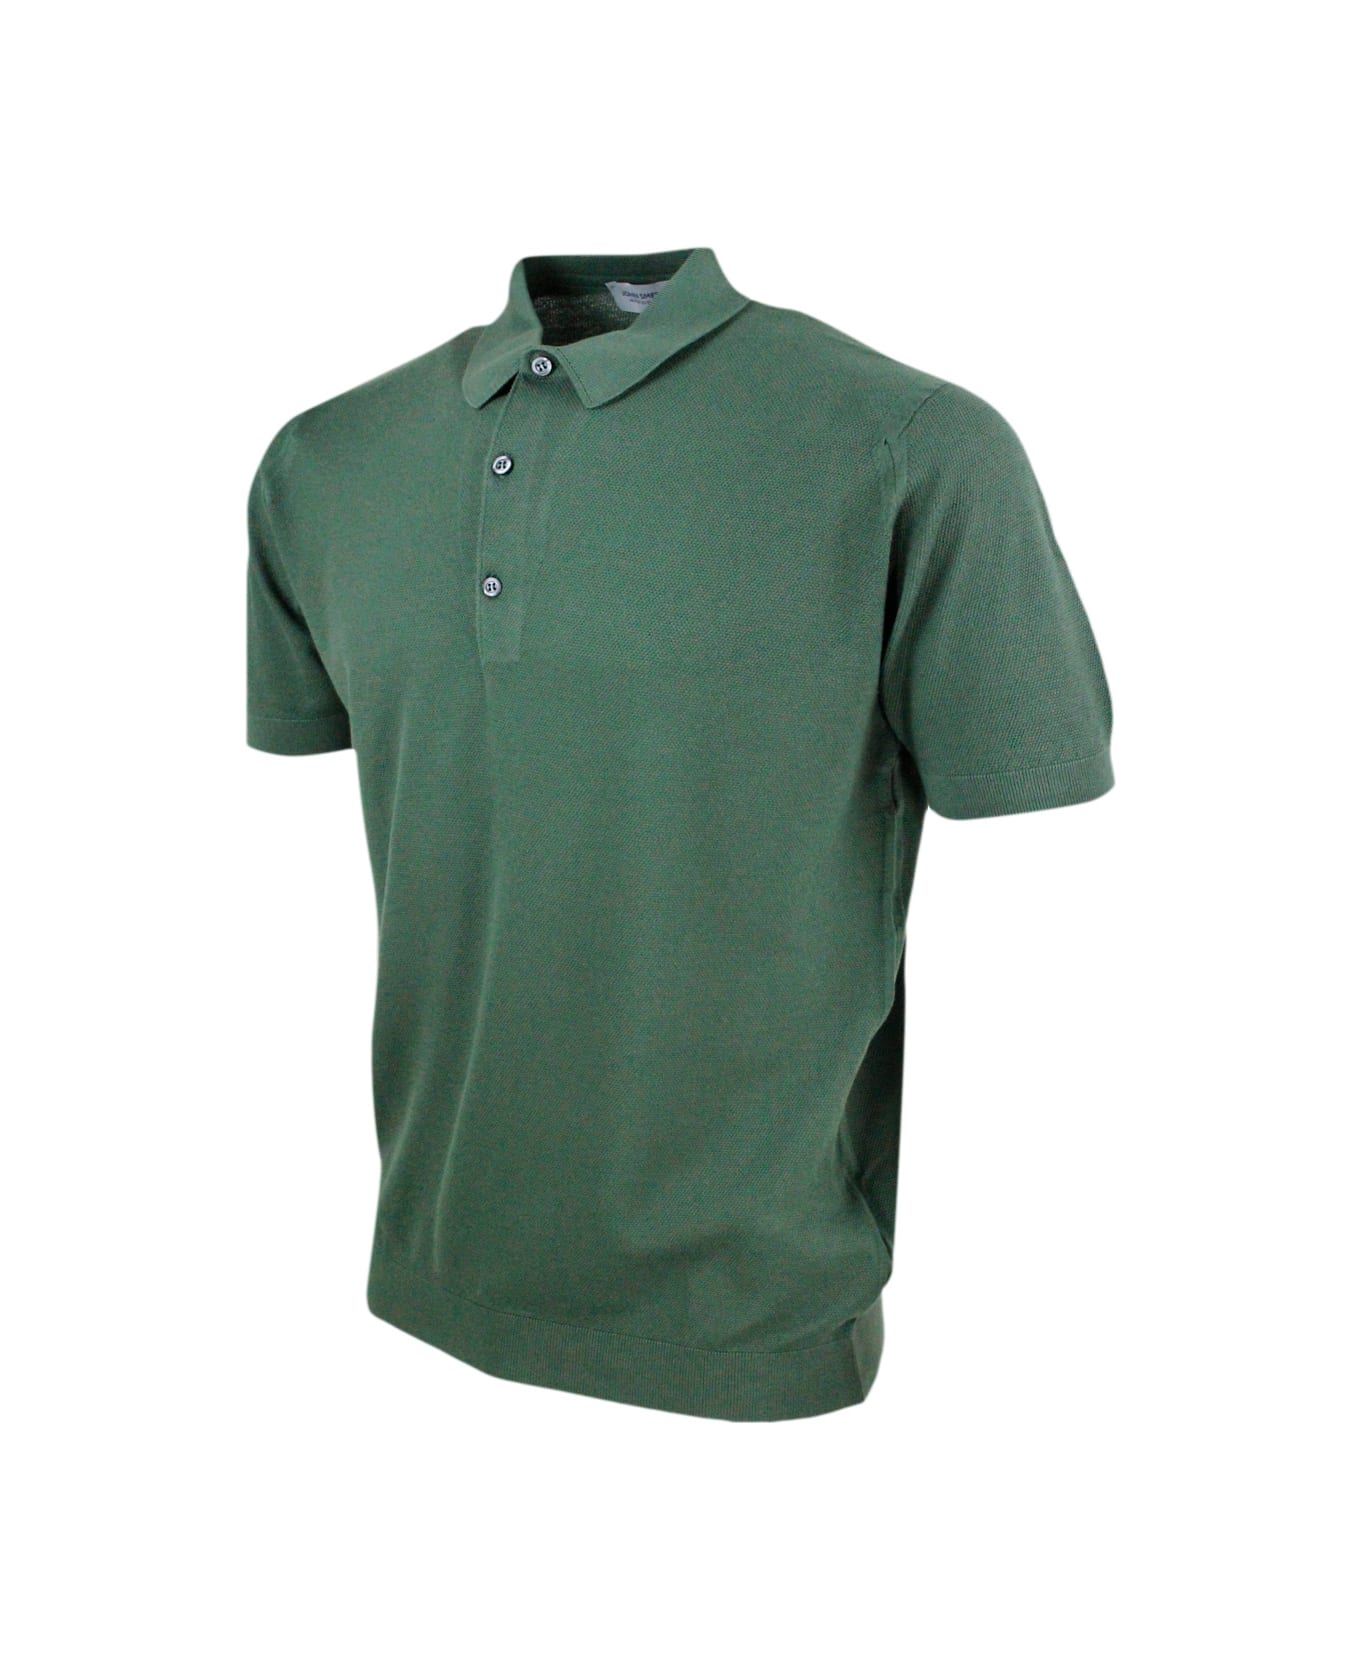 John Smedley Short-sleeved Polo Shirt In Extrafine Piqué Cotton Thread With Three Buttons - Green ポロシャツ